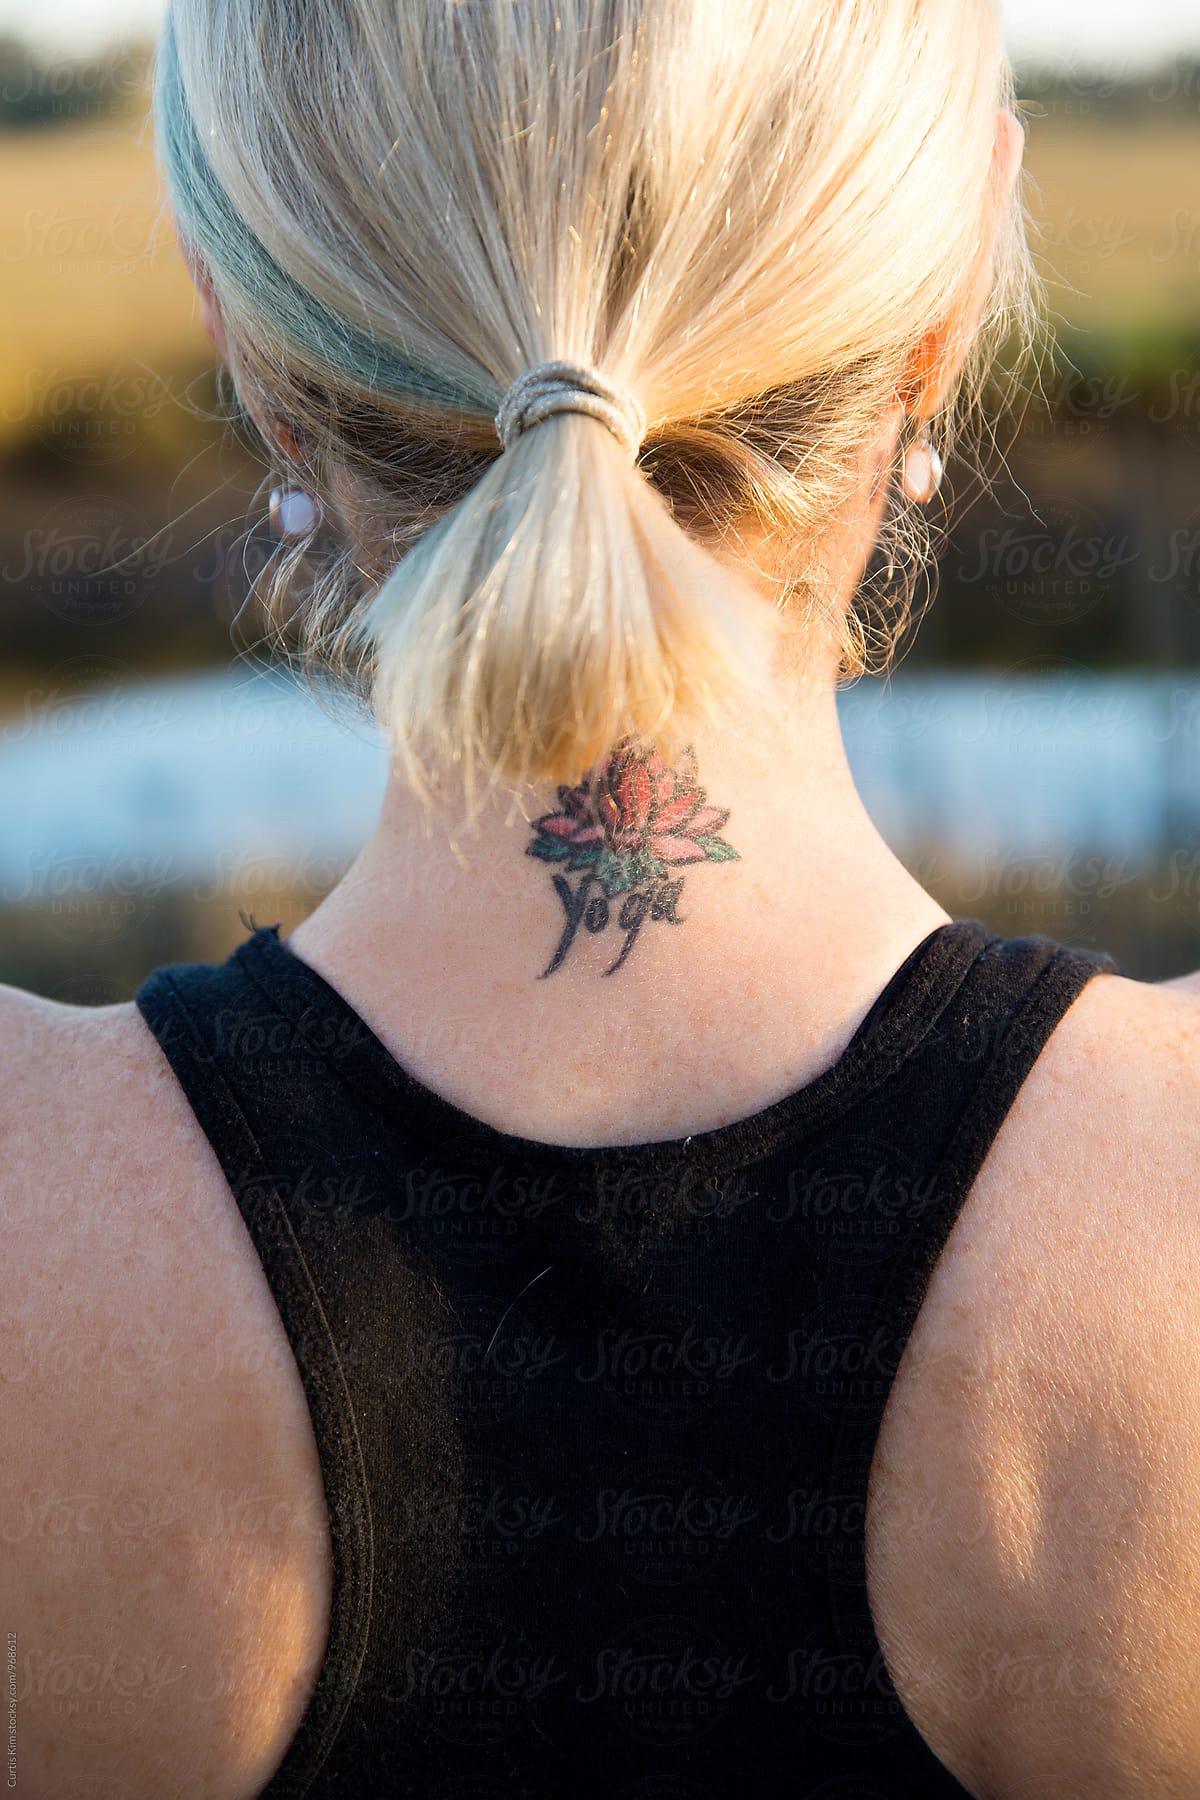 Crown tattoo on the back of the neck.